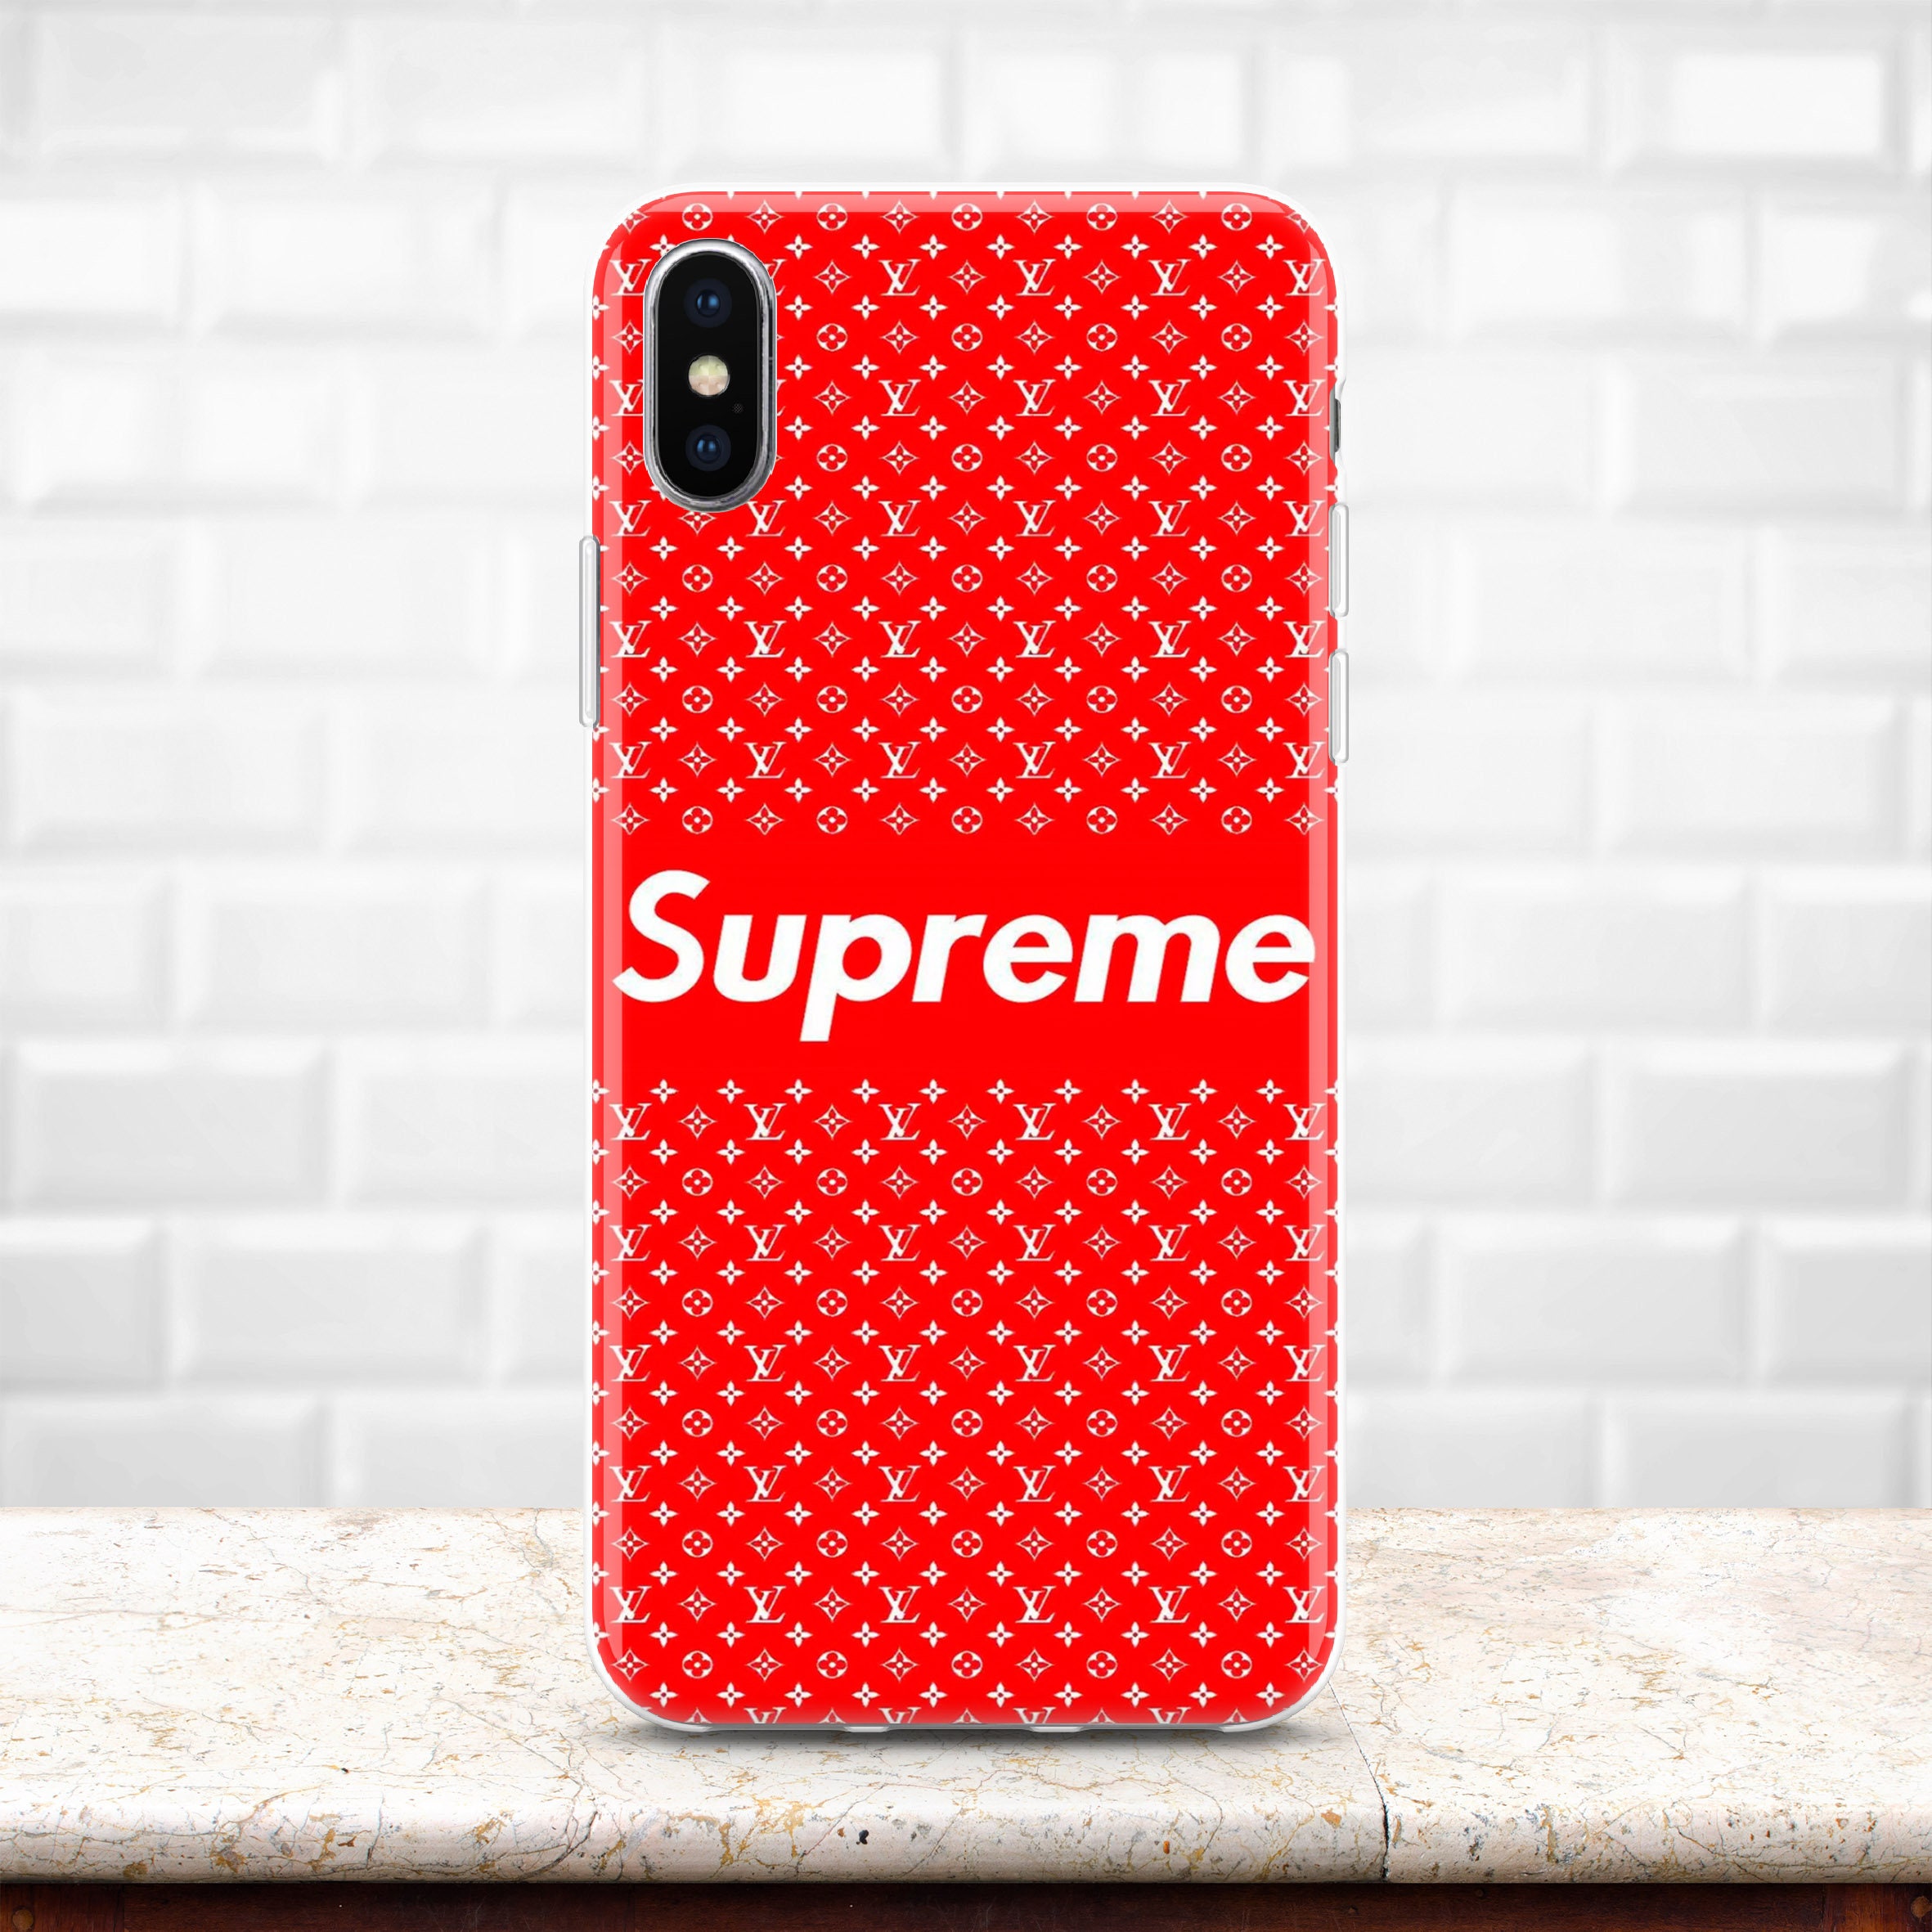 iPhone 8 Plus Red case Samsnung Galaxy Note 8 Red Supreme case